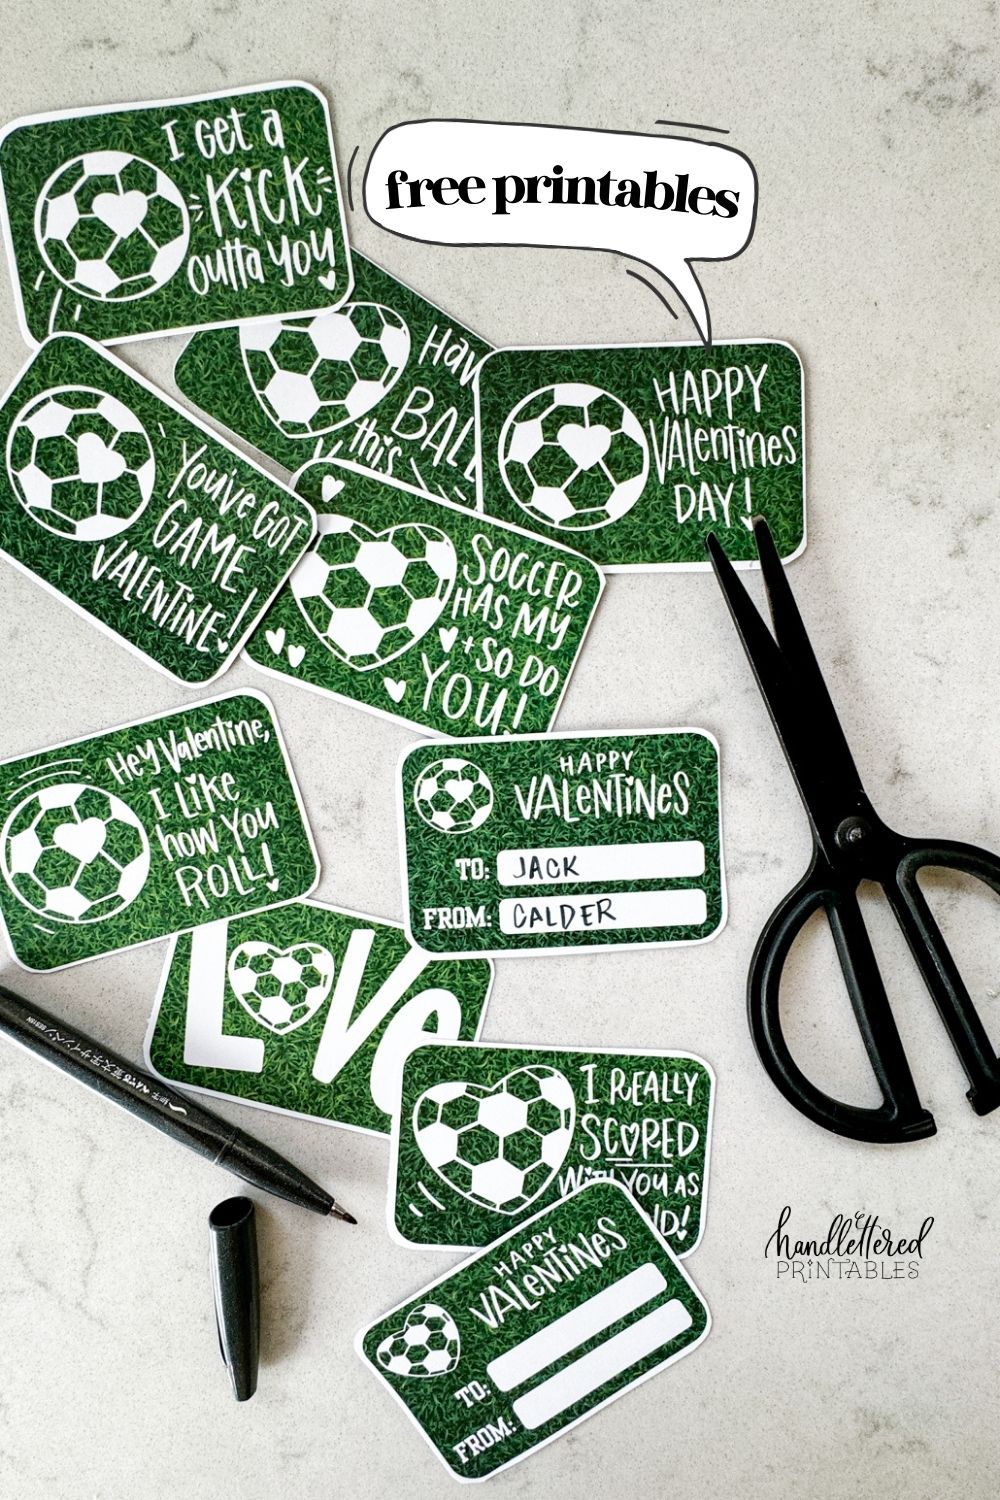 text reads: free printables image shows soccer themed valentines cut to size with rounded corners on a marble countertop and styled with a black pen and black scissors valentines have a heart shaped soccer ball and a soccer ball with a heart on it and a grass background. valentines puns and sentiments include: happy valentines day, have a ball this valentines, hey valentine i like how you roll, soccer has my heart and so do you, i get a kick outta you, love (with a heart soccerball as the o), you've got game valentine, and i really scored with you as a friend reverse reads 'happy valentines' with room for to and from names. soccer/ american football